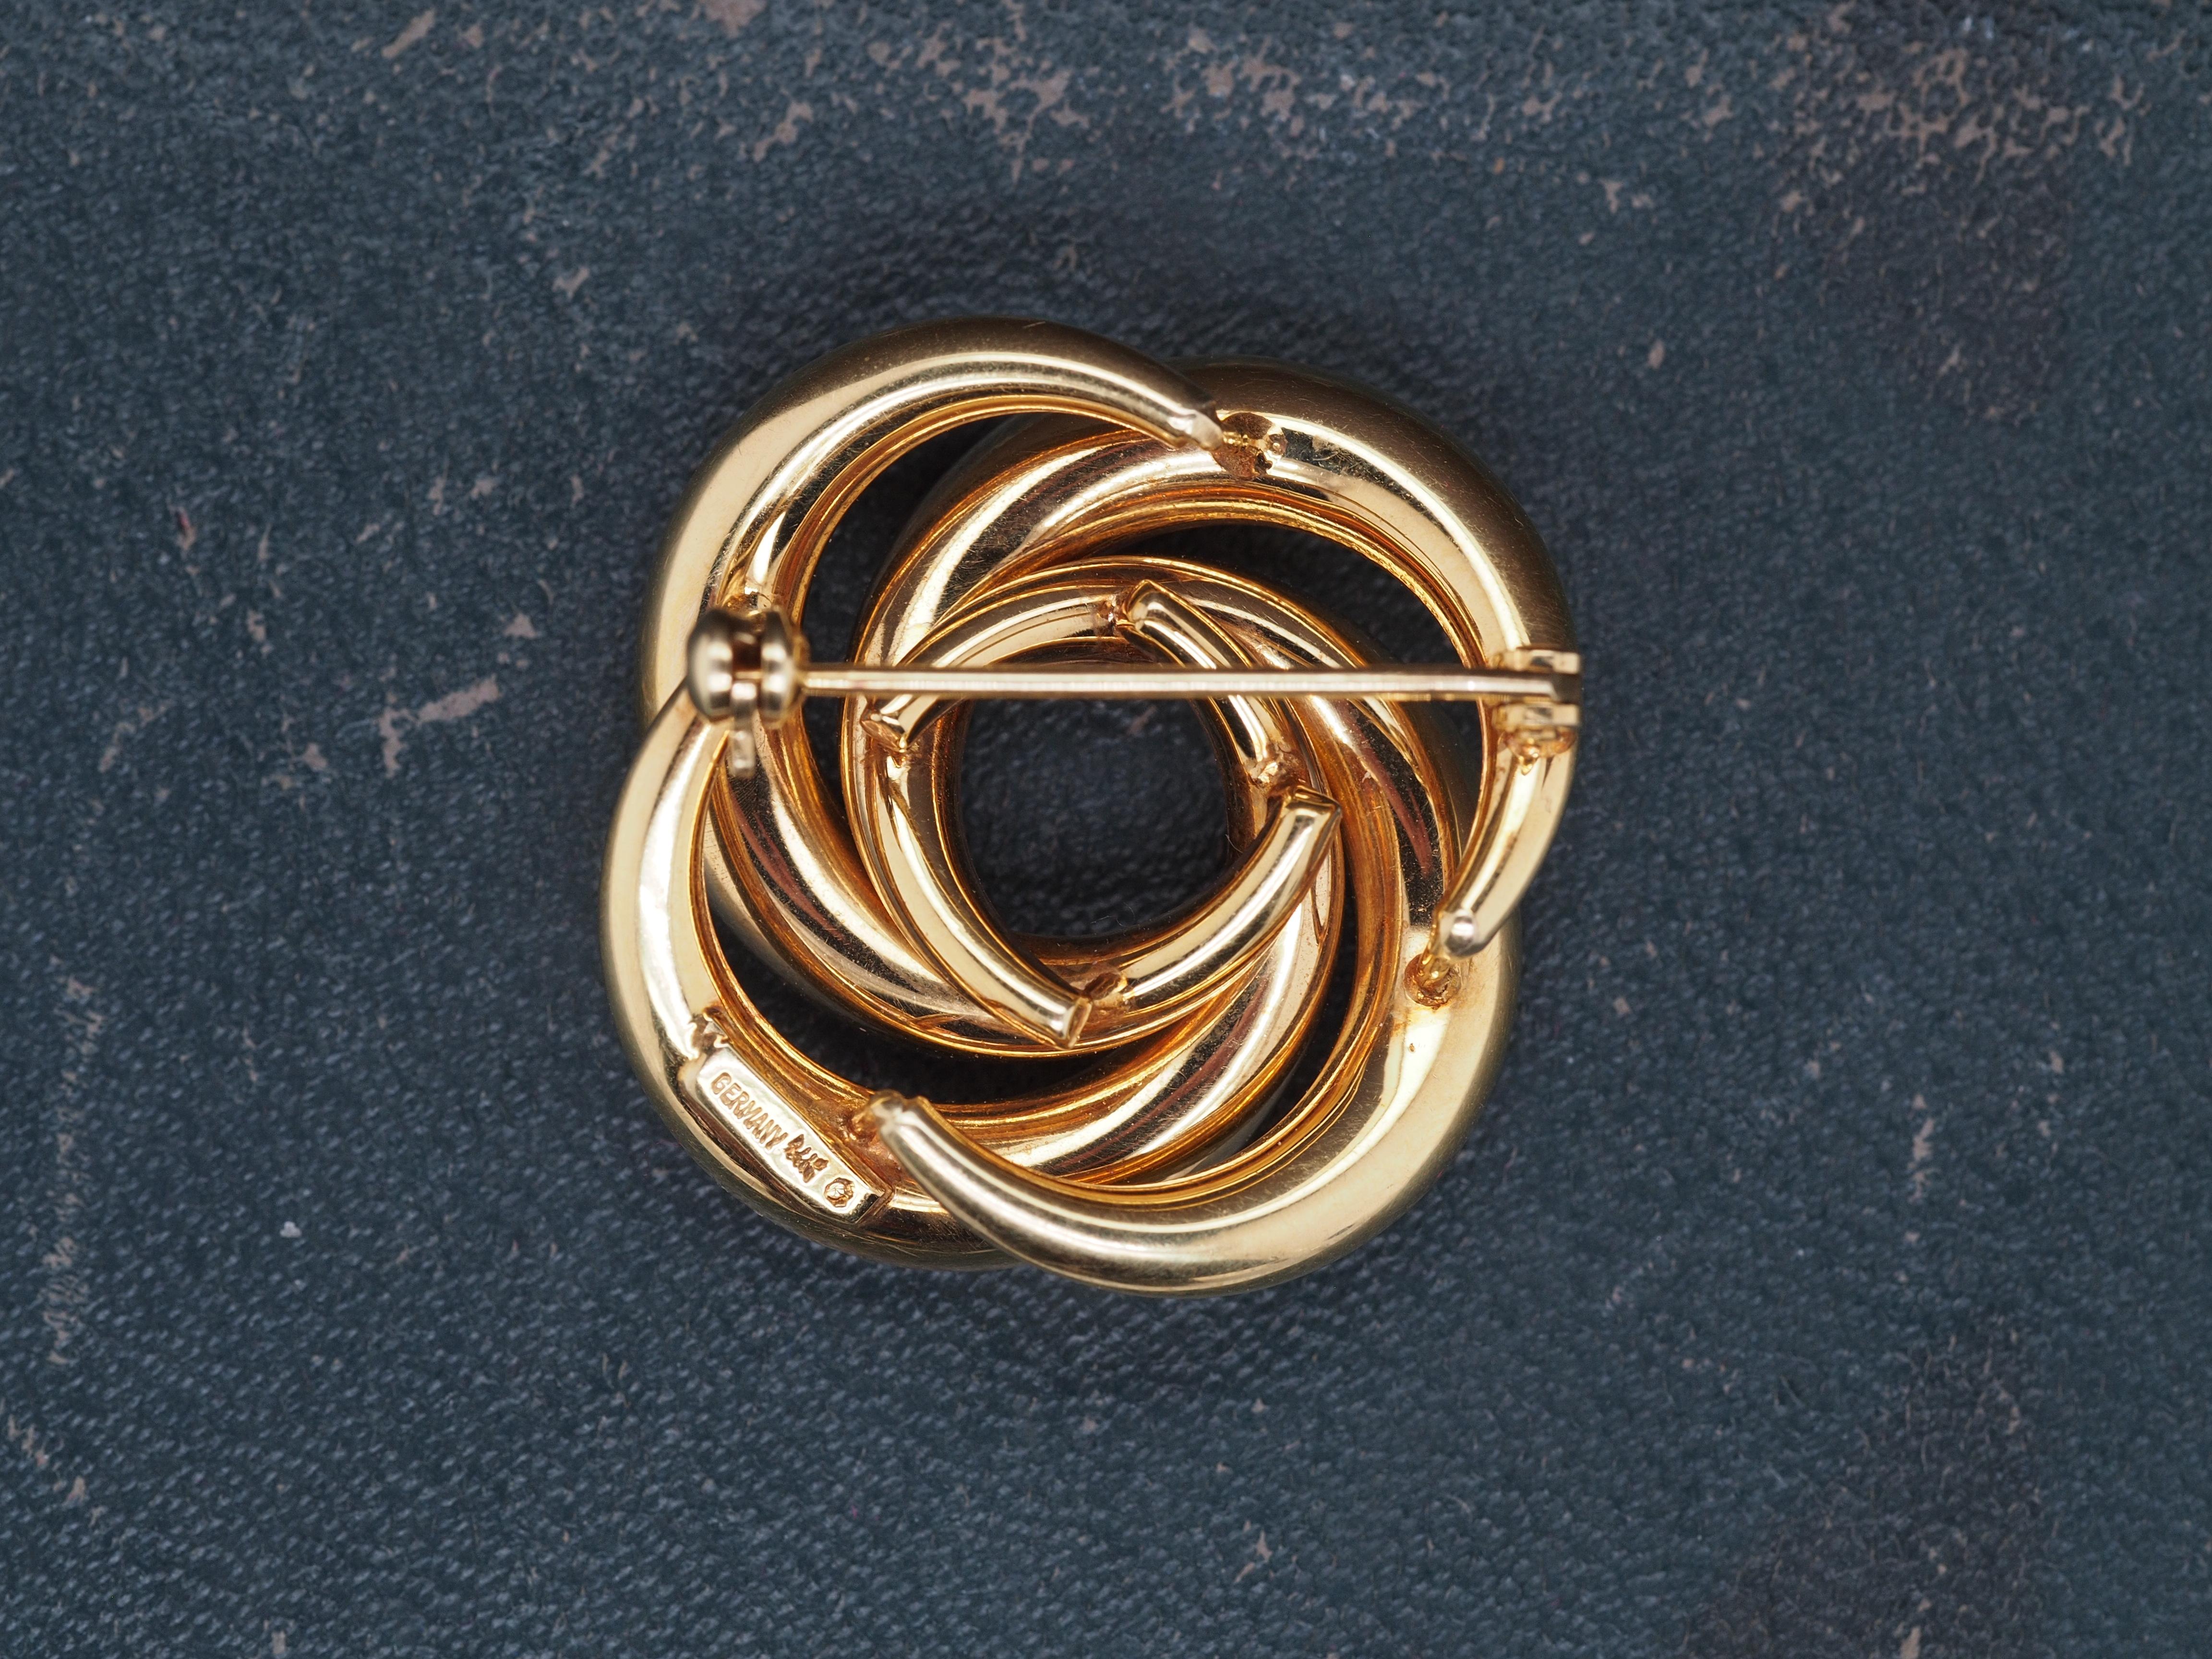 Art Deco Vintage 14K Yellow Gold 1930s Swirl Brooch with German Hallmarks For Sale